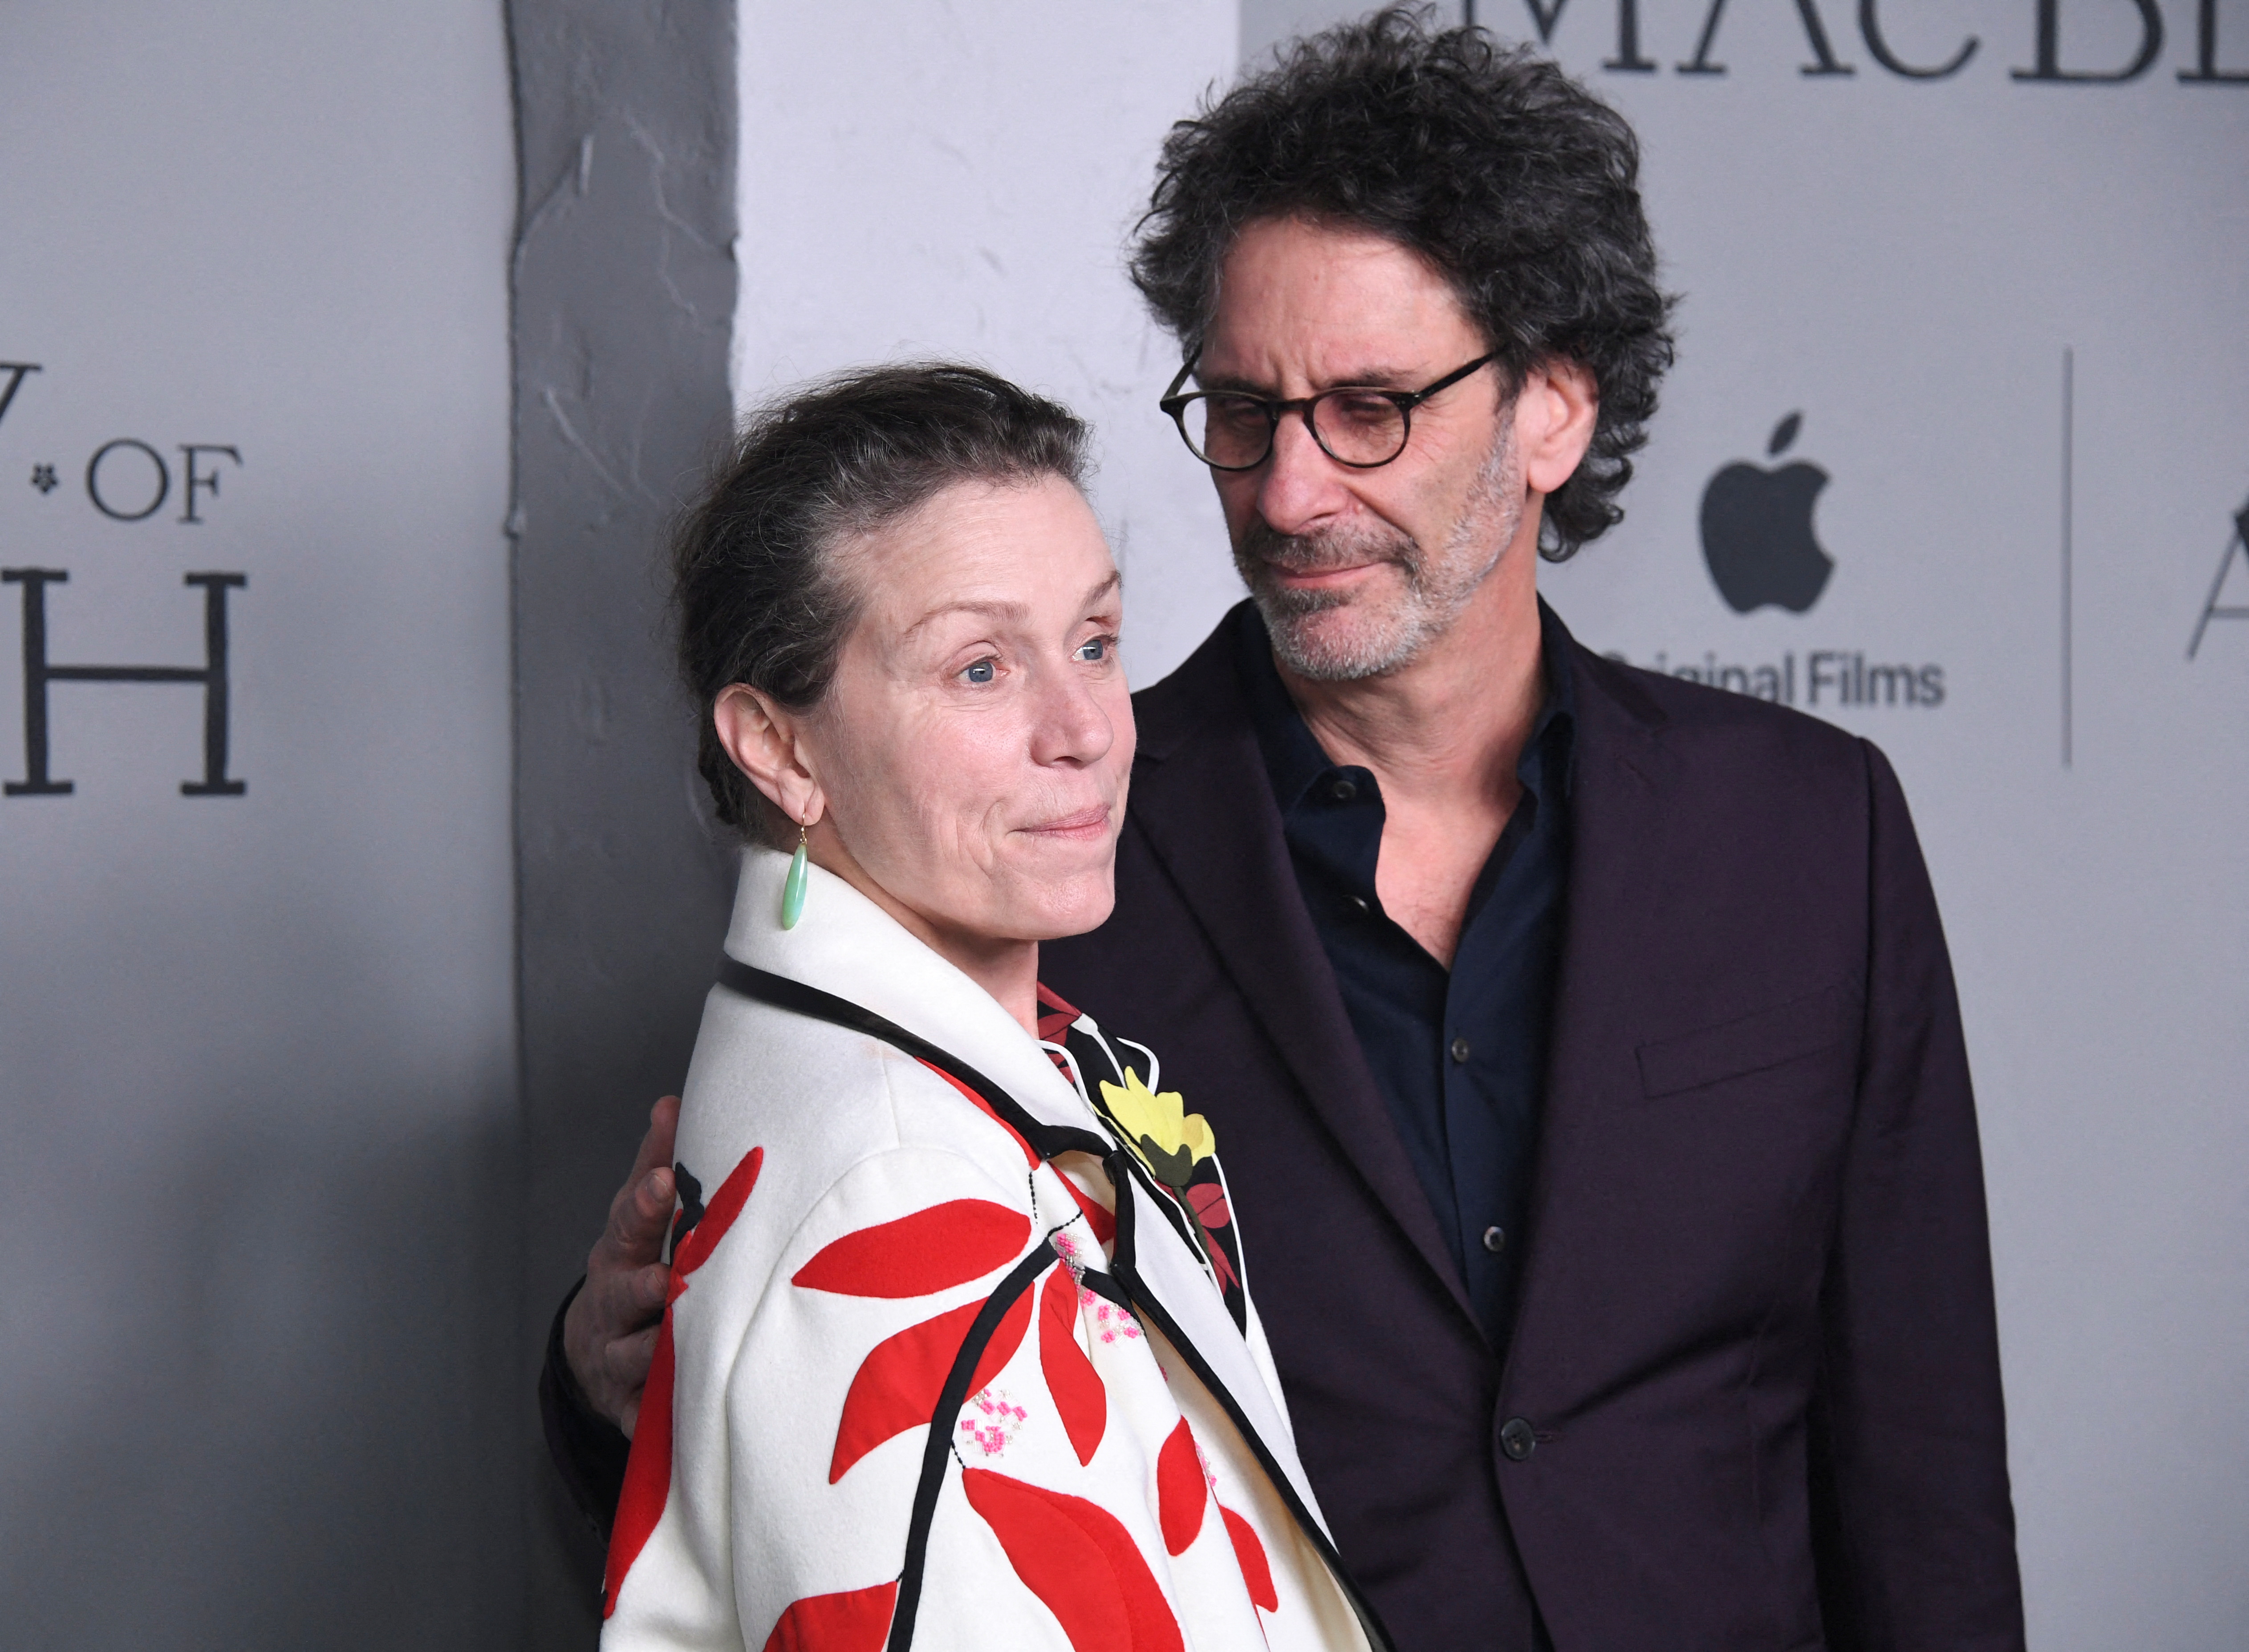 Cast member Frances McDormand and director Joel Coen attend the premiere for the film The Tragedy of Macbeth in Los Angeles, California, U.S., December 16, 2021. REUTERS/Phil McCarten